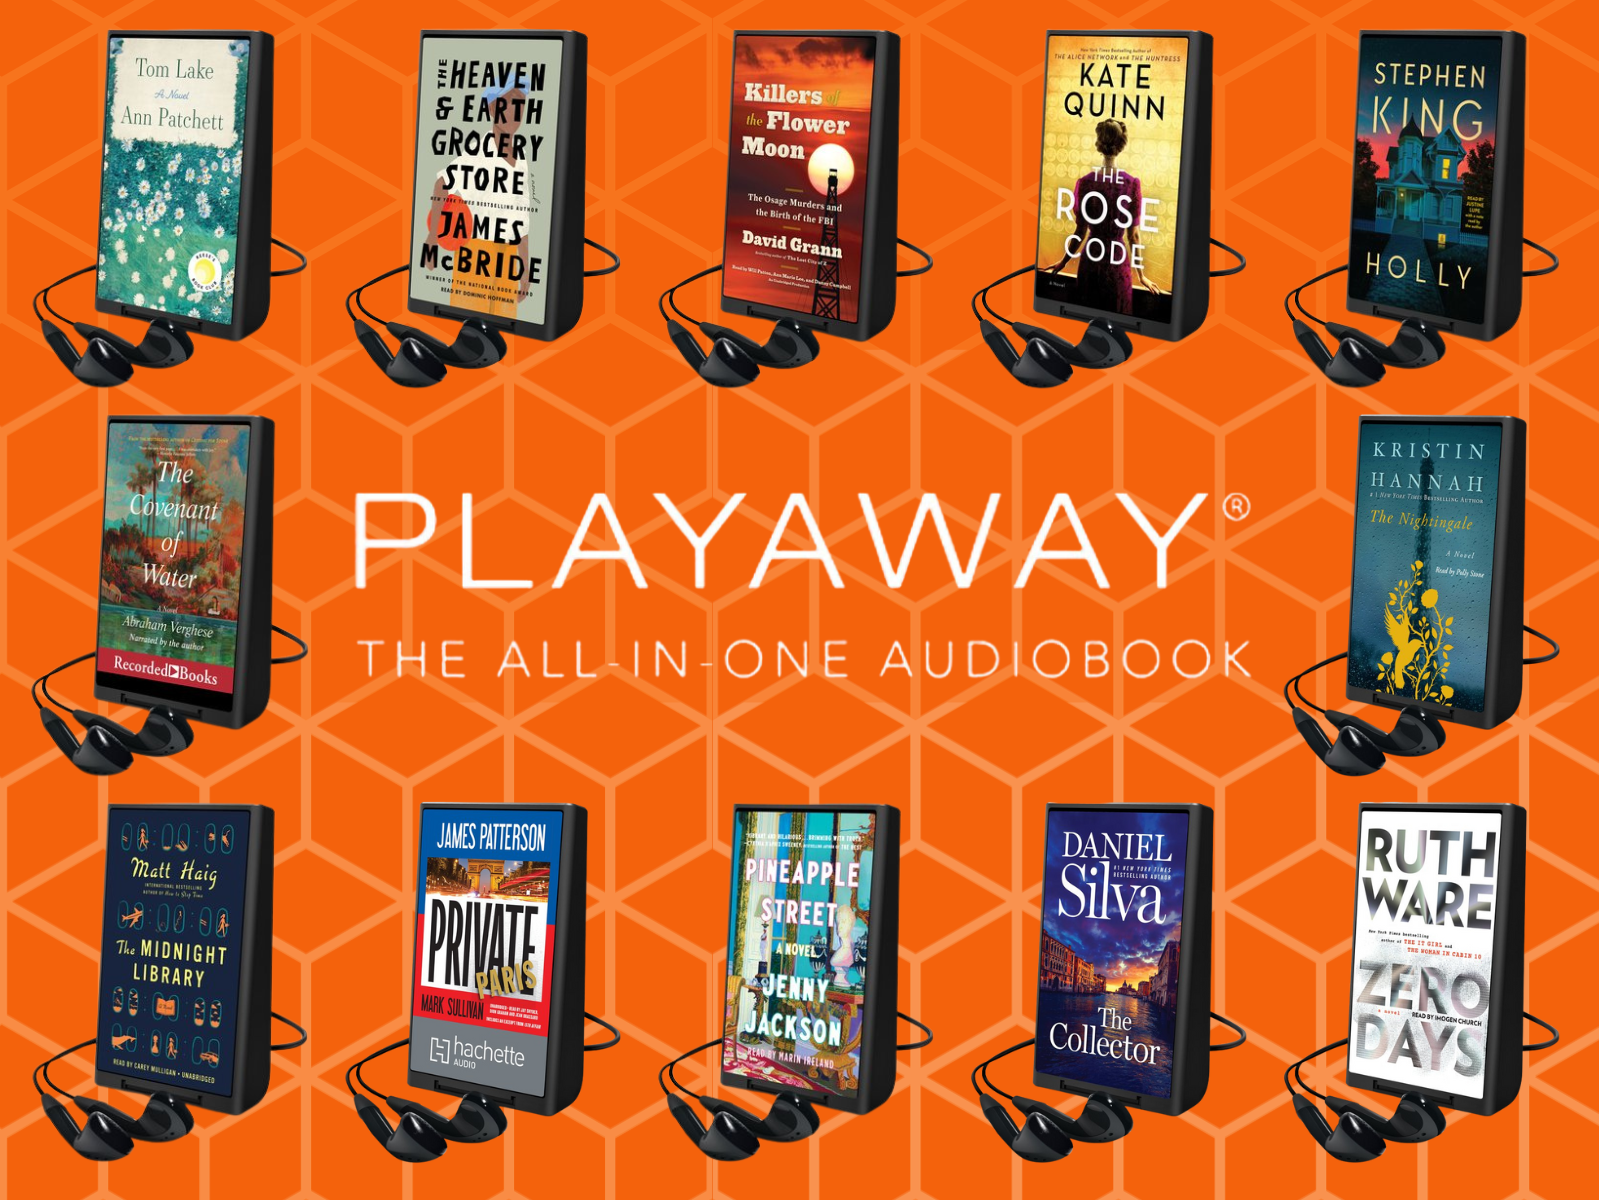 Check out a Playaway to bring home a self-contained audiobook from the Bedford Public Library!